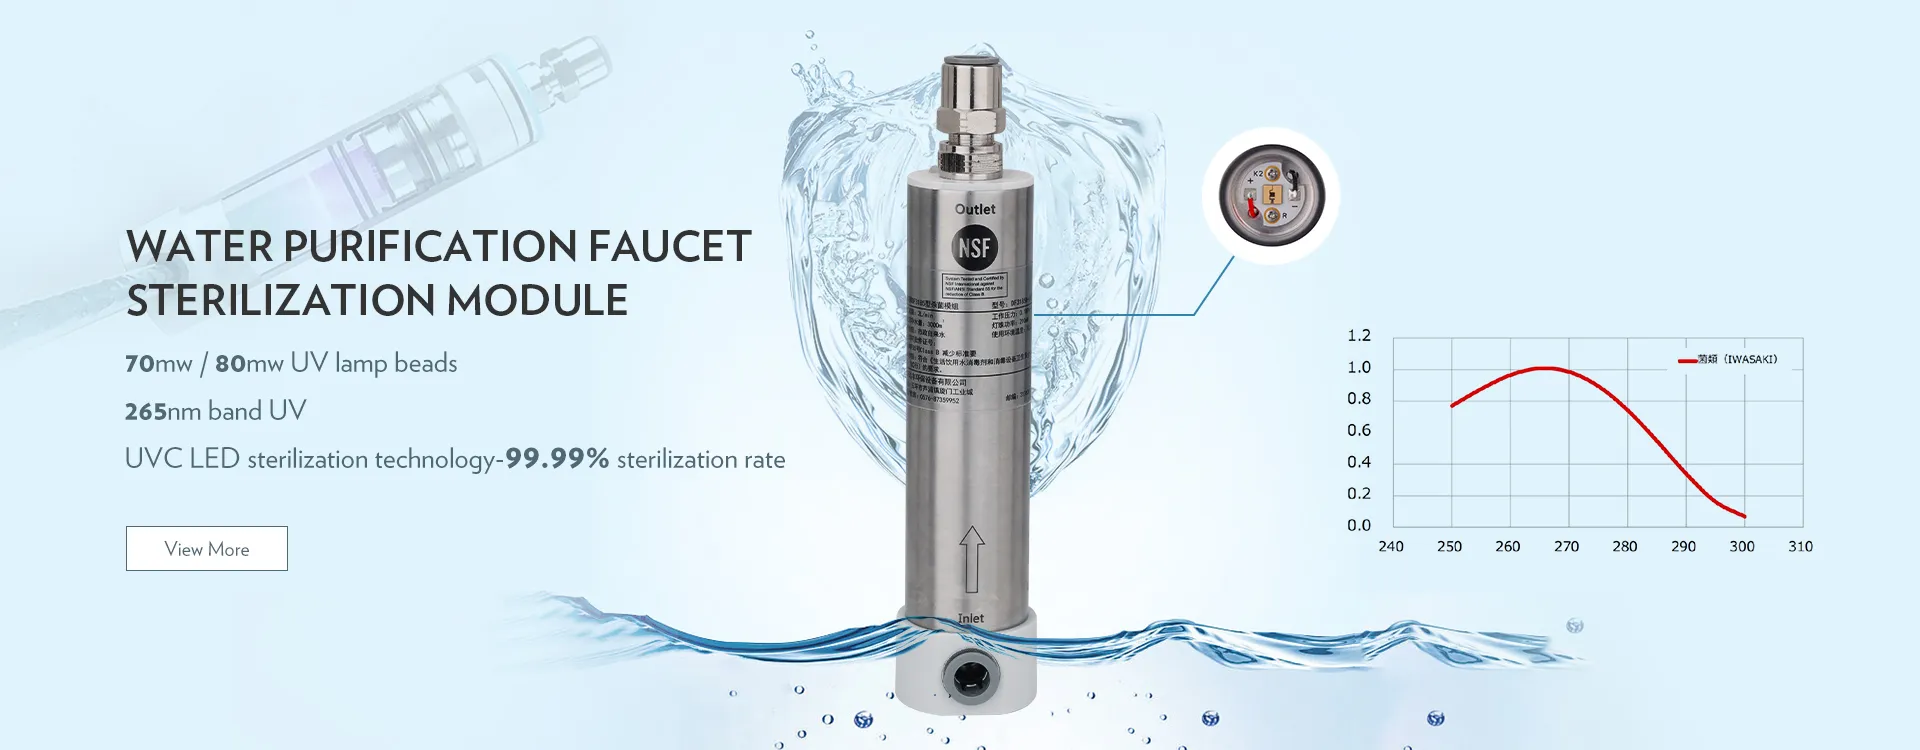 Water Purification Faucet